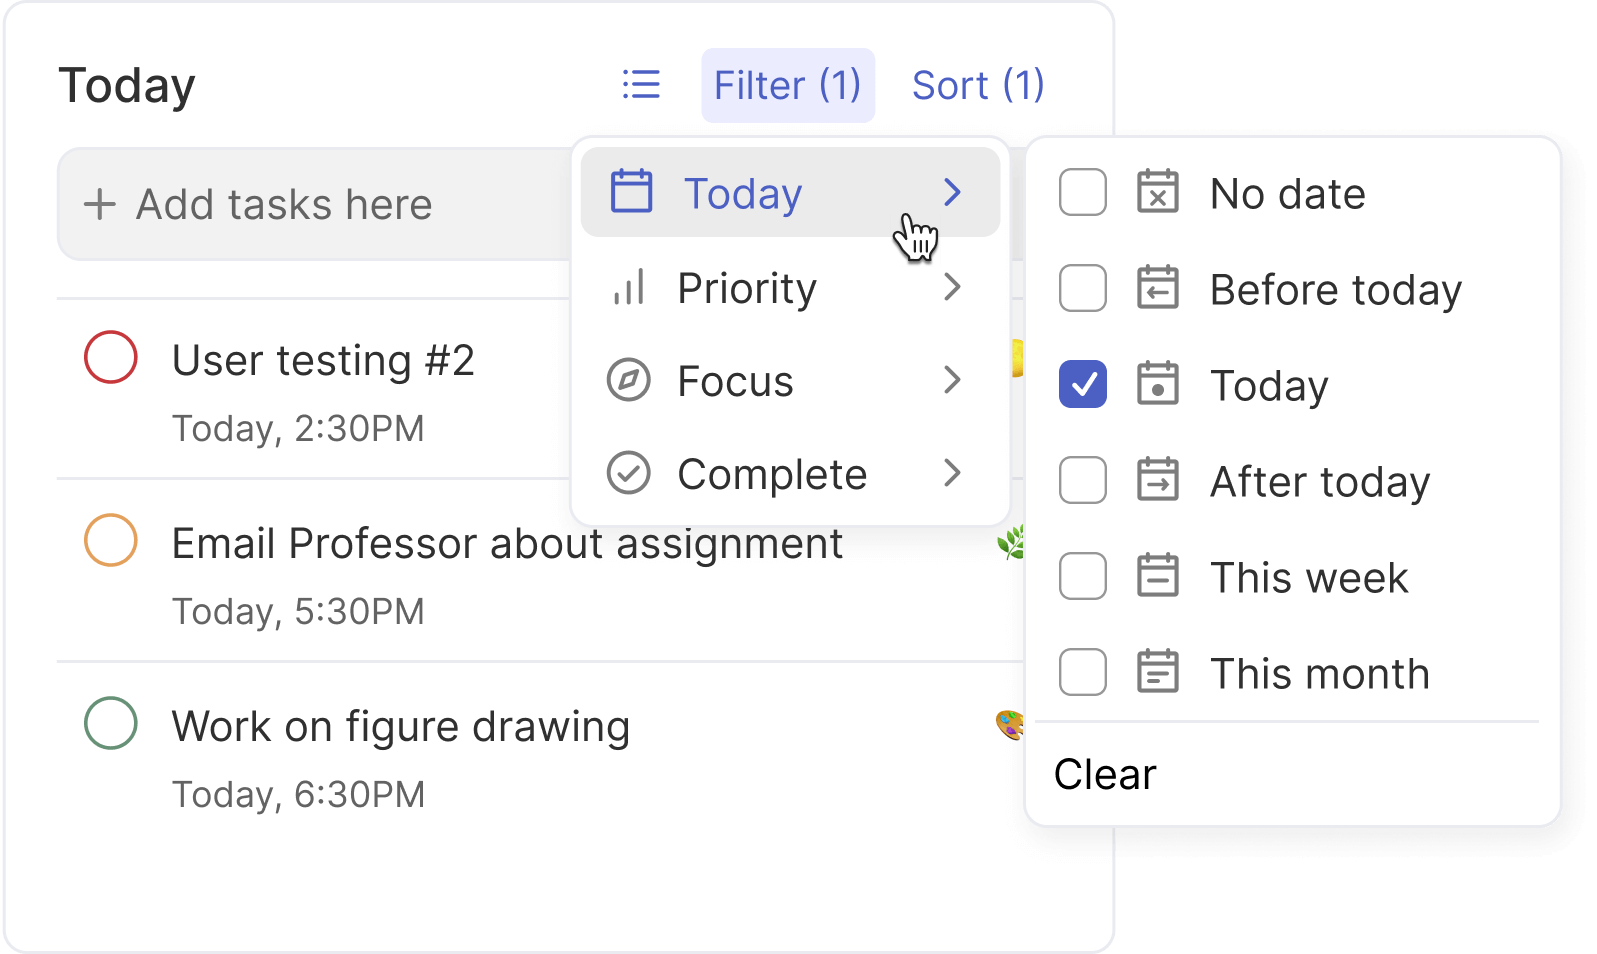 A popup with options to display tasks for today, no date, before today, after today, this week, or this month